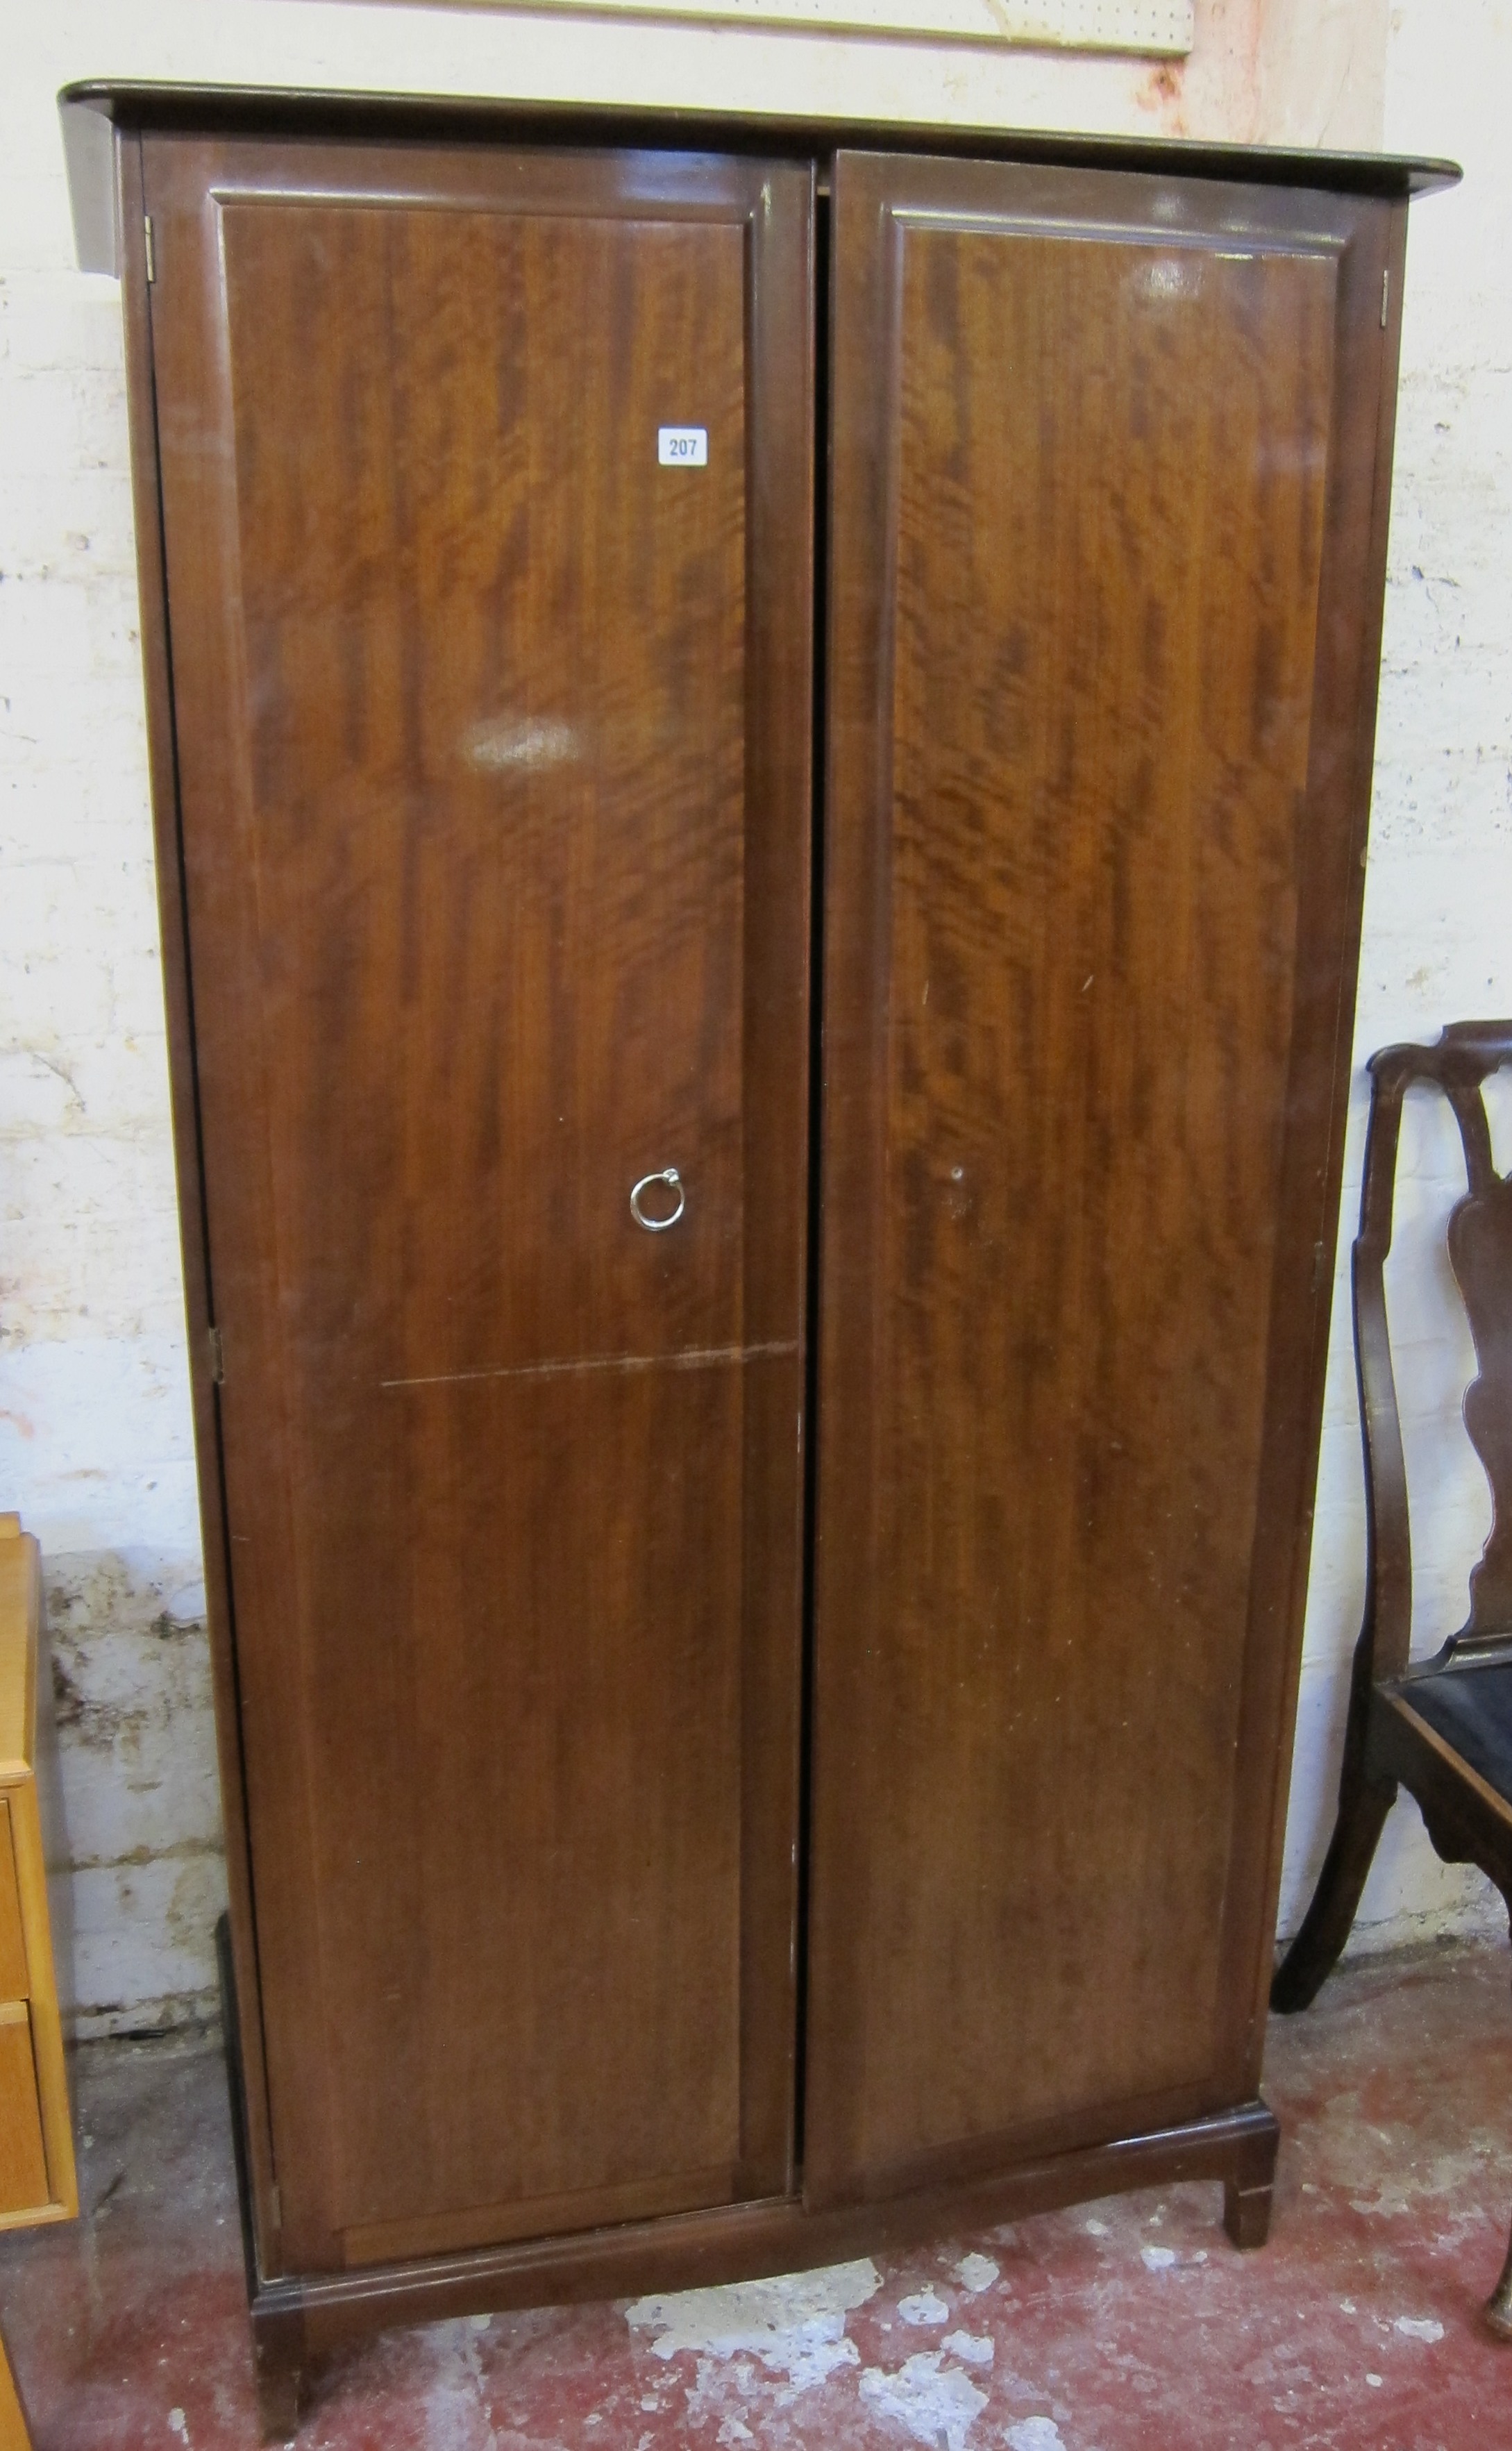 A two door Stag wardrobe, a chest of drawers, a dining chair, an oak cabinet and stand Best Bid